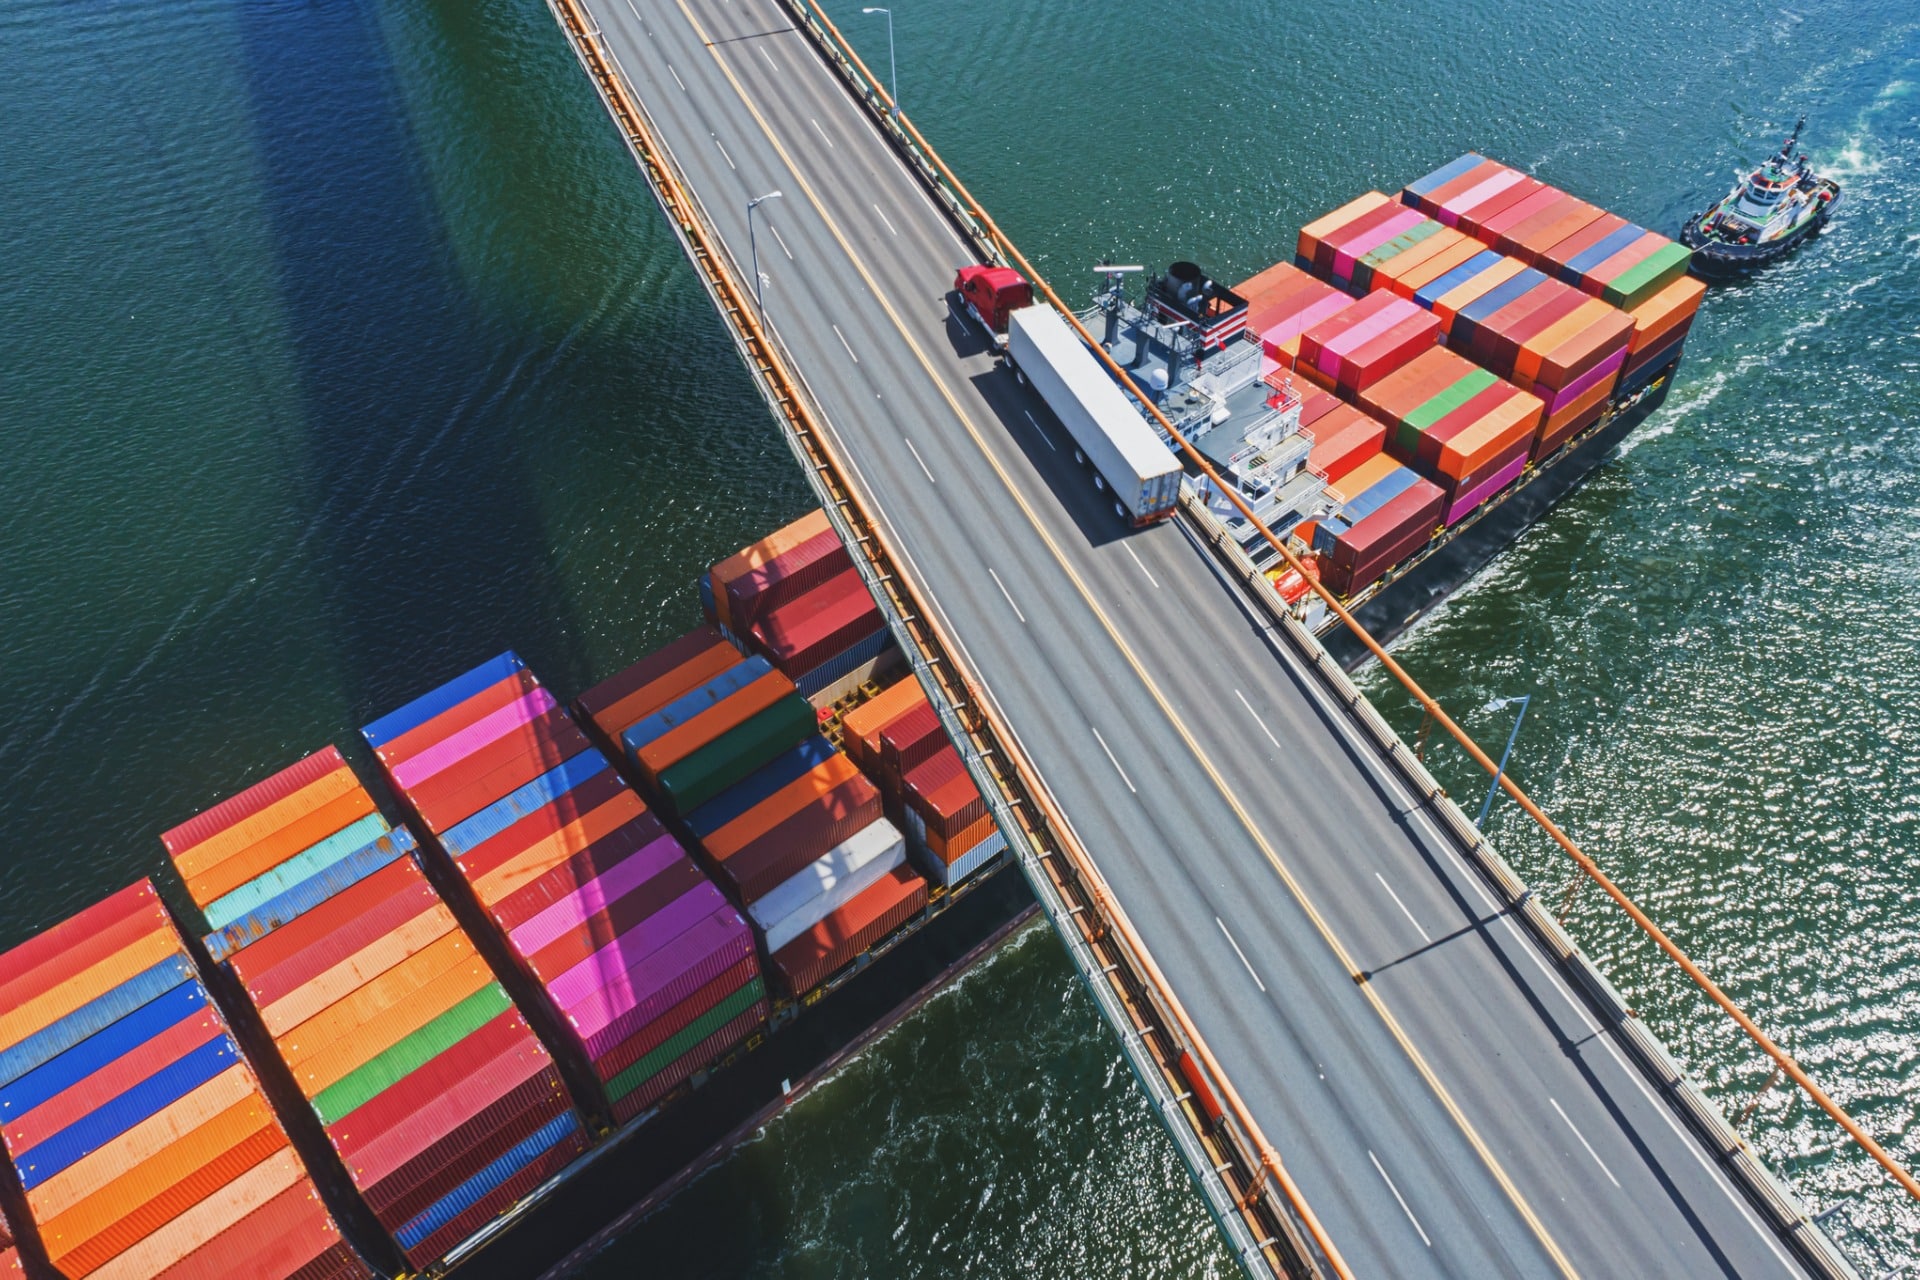 This is a photo of a ship covered in multi-colored shipping containers passing underneath a bridge that has a semi-truck driving across it. This photo represents the supply chain and recent difficulties managing the supply chain.